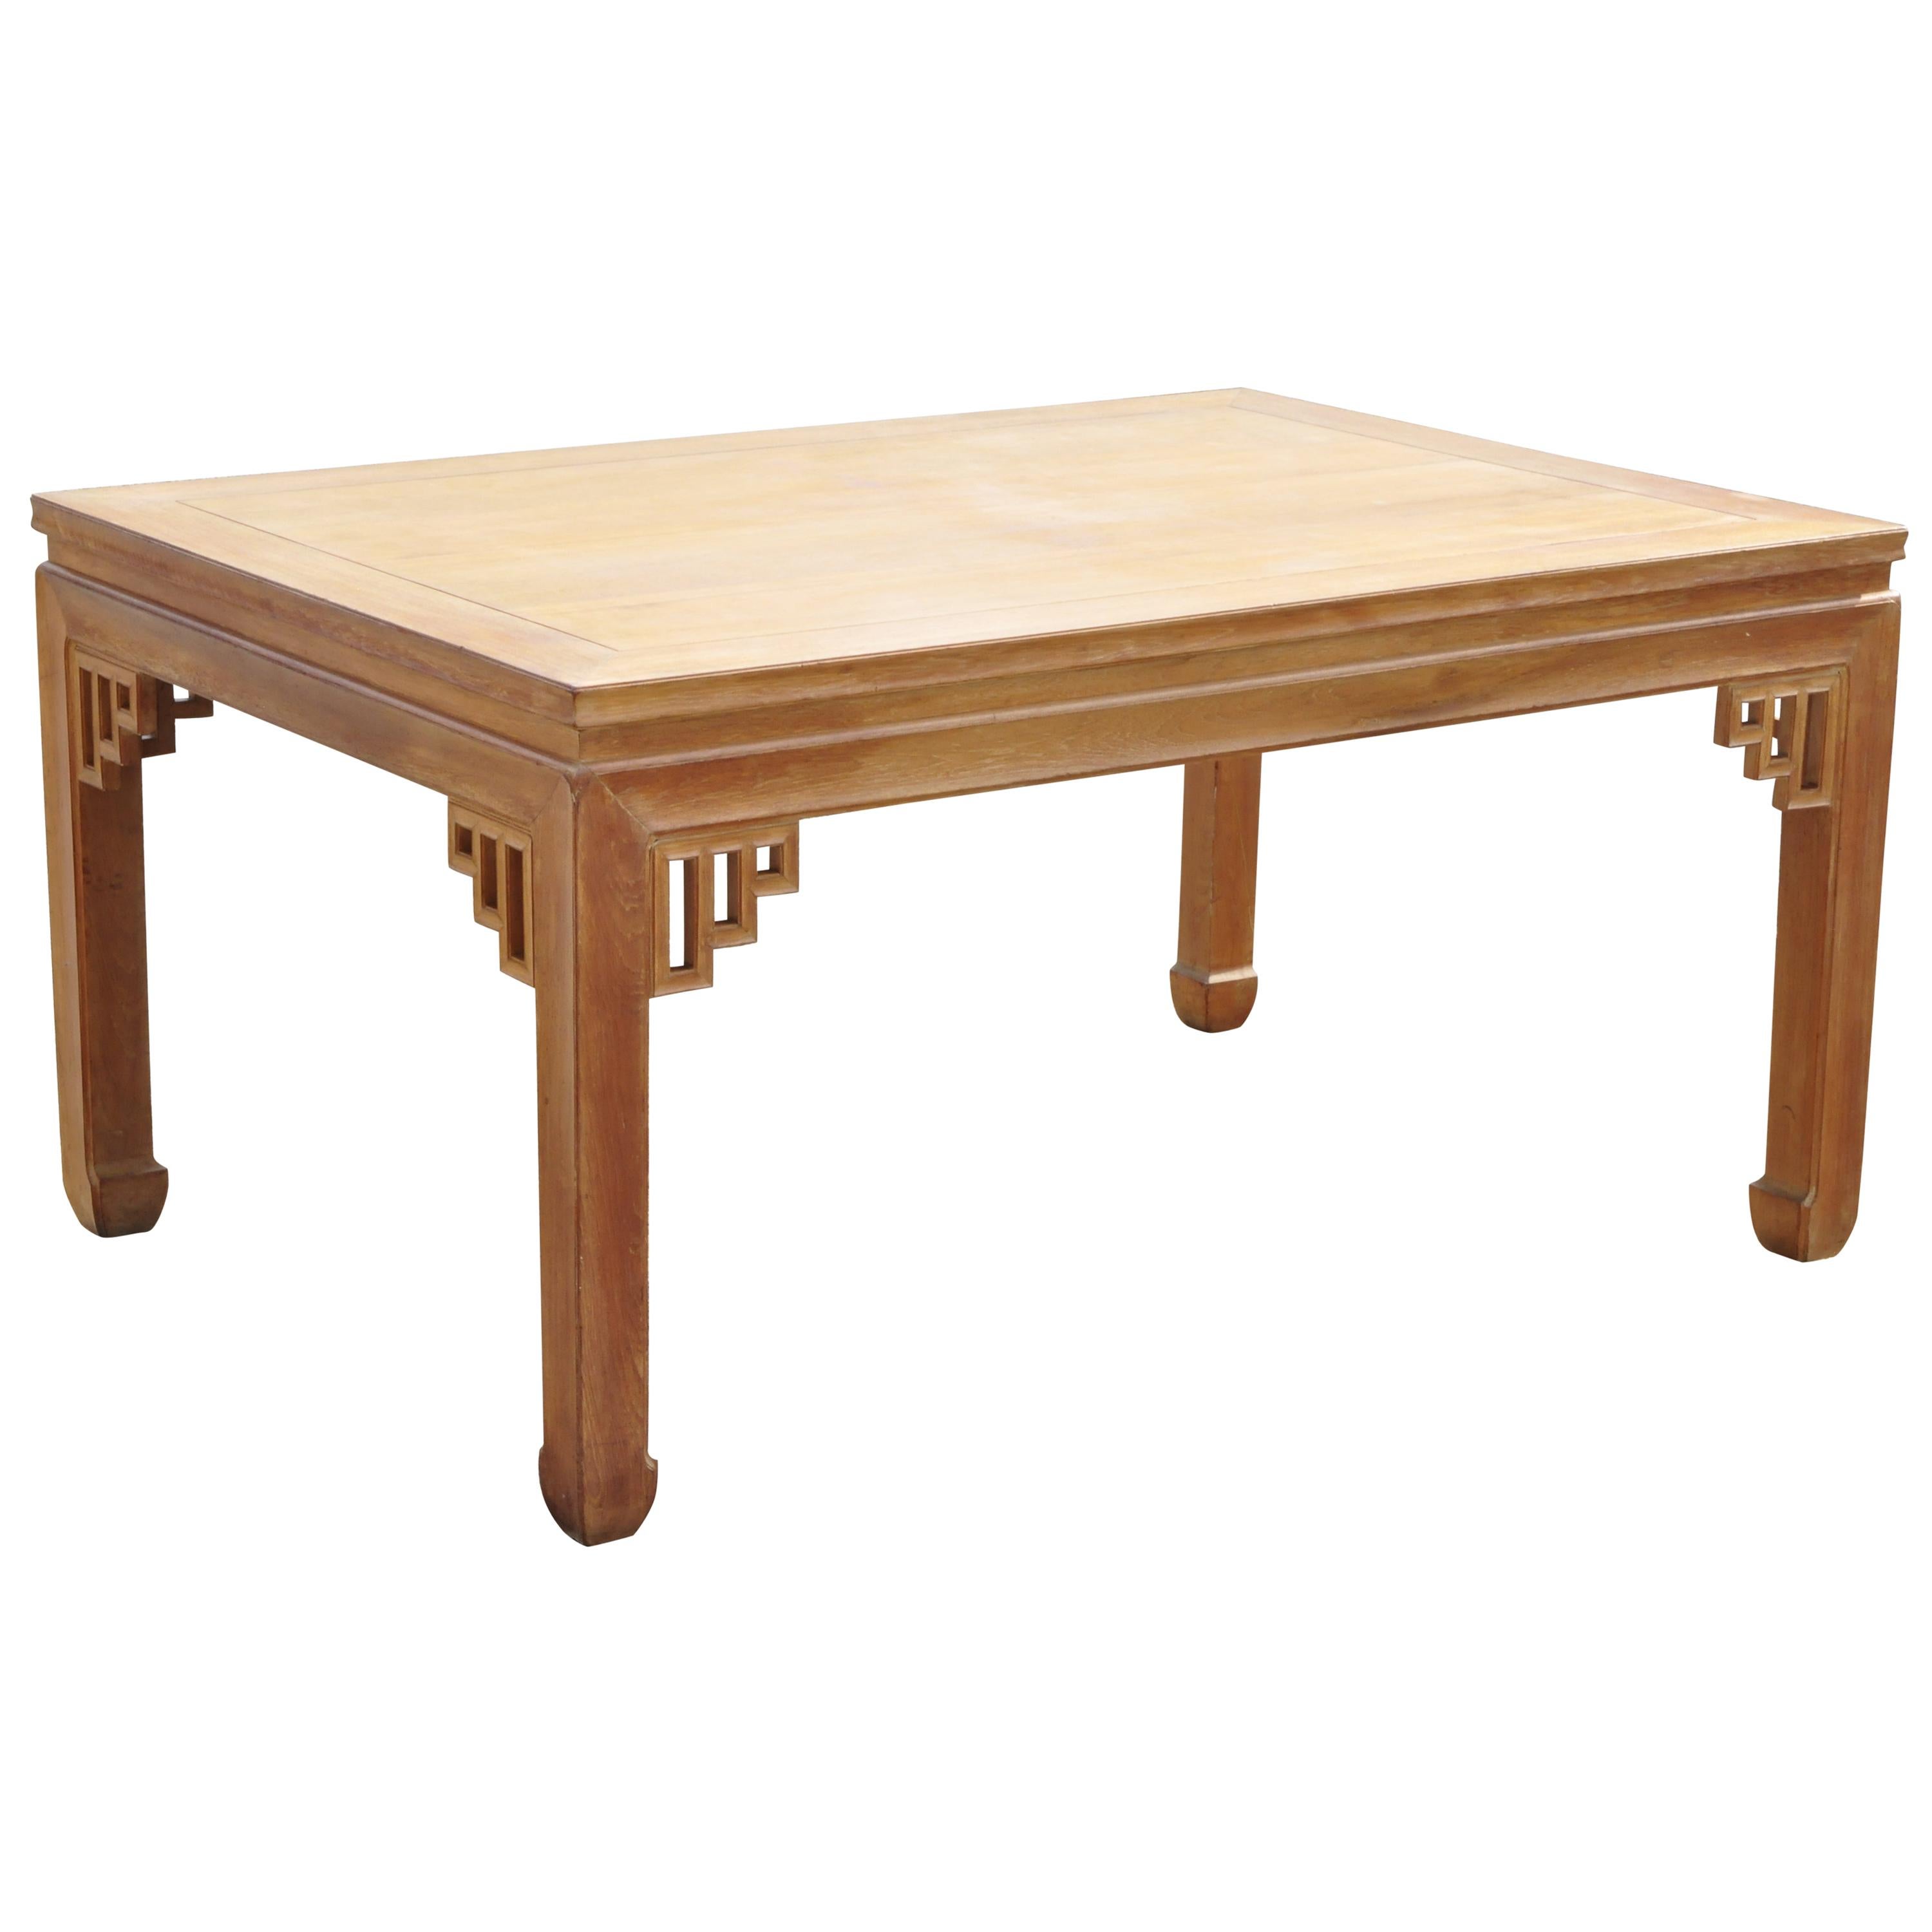 Vintage Teak Wood Ming Style Rectangular Dining Table by Dynasty Transorient